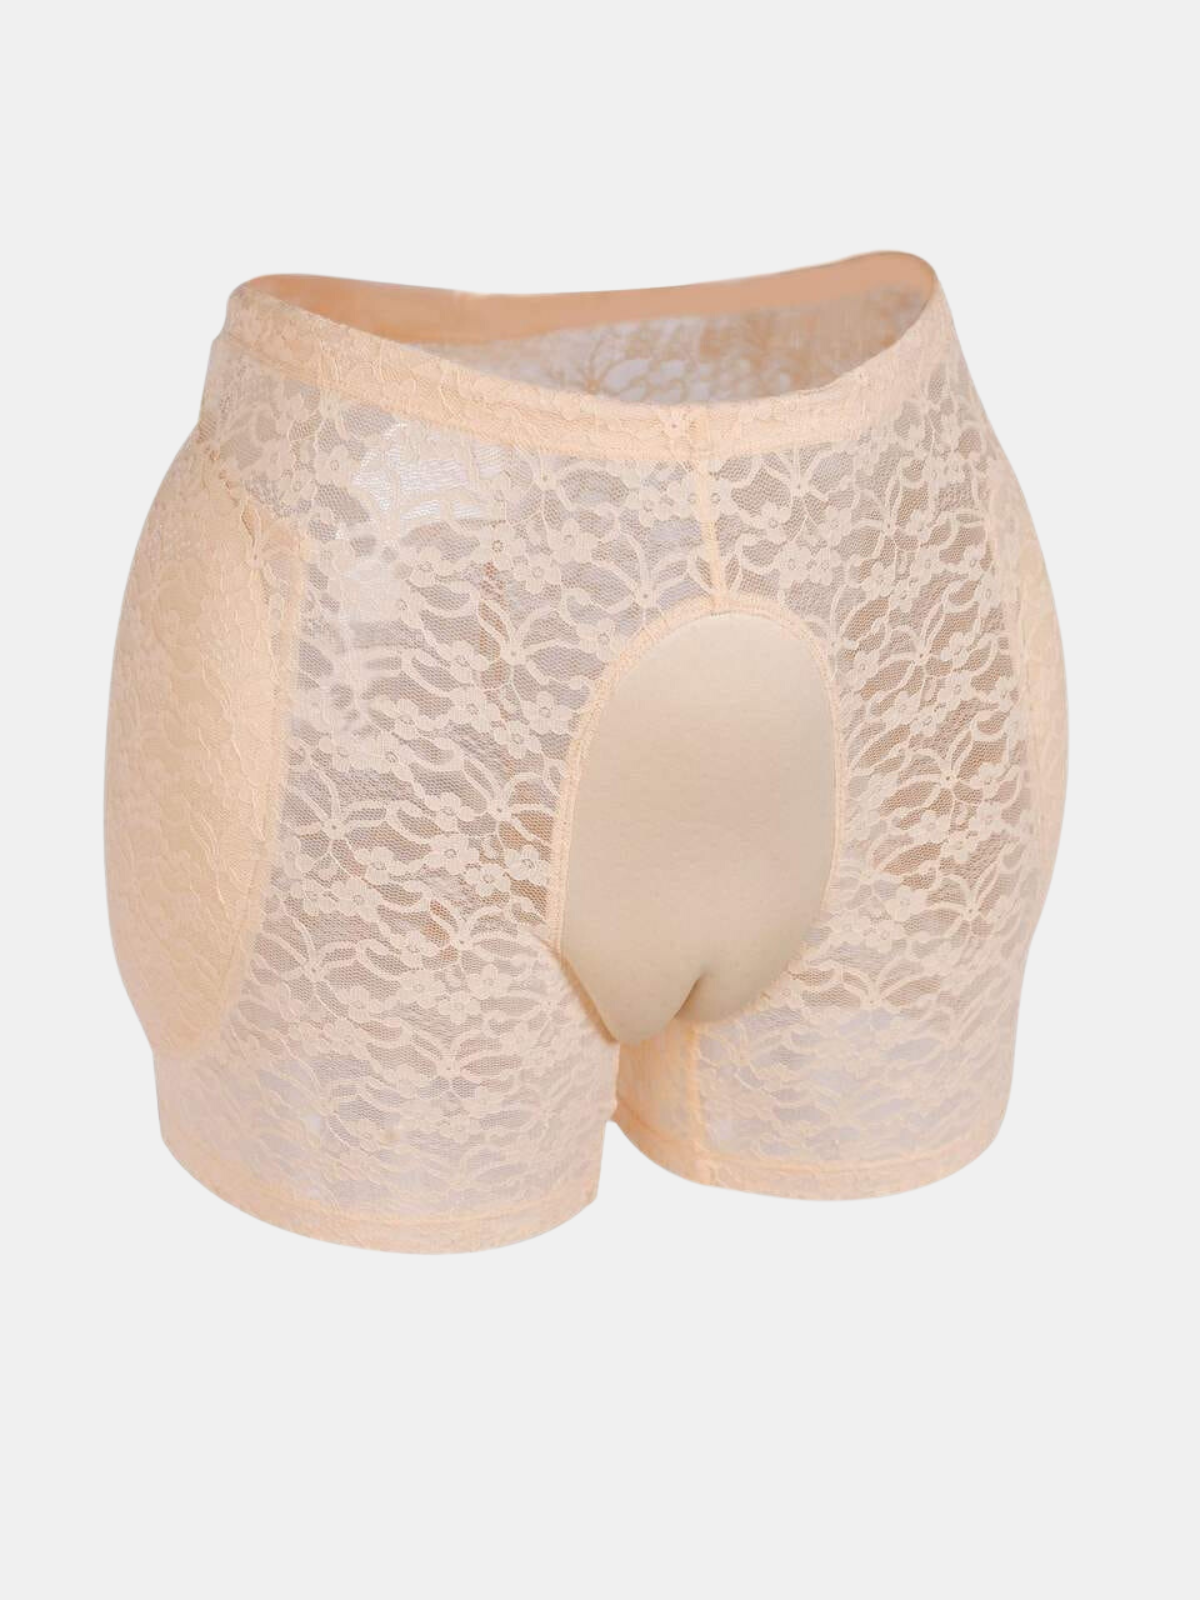 Realistic Camel Toe Panties, Breathable and Soft -  Australia